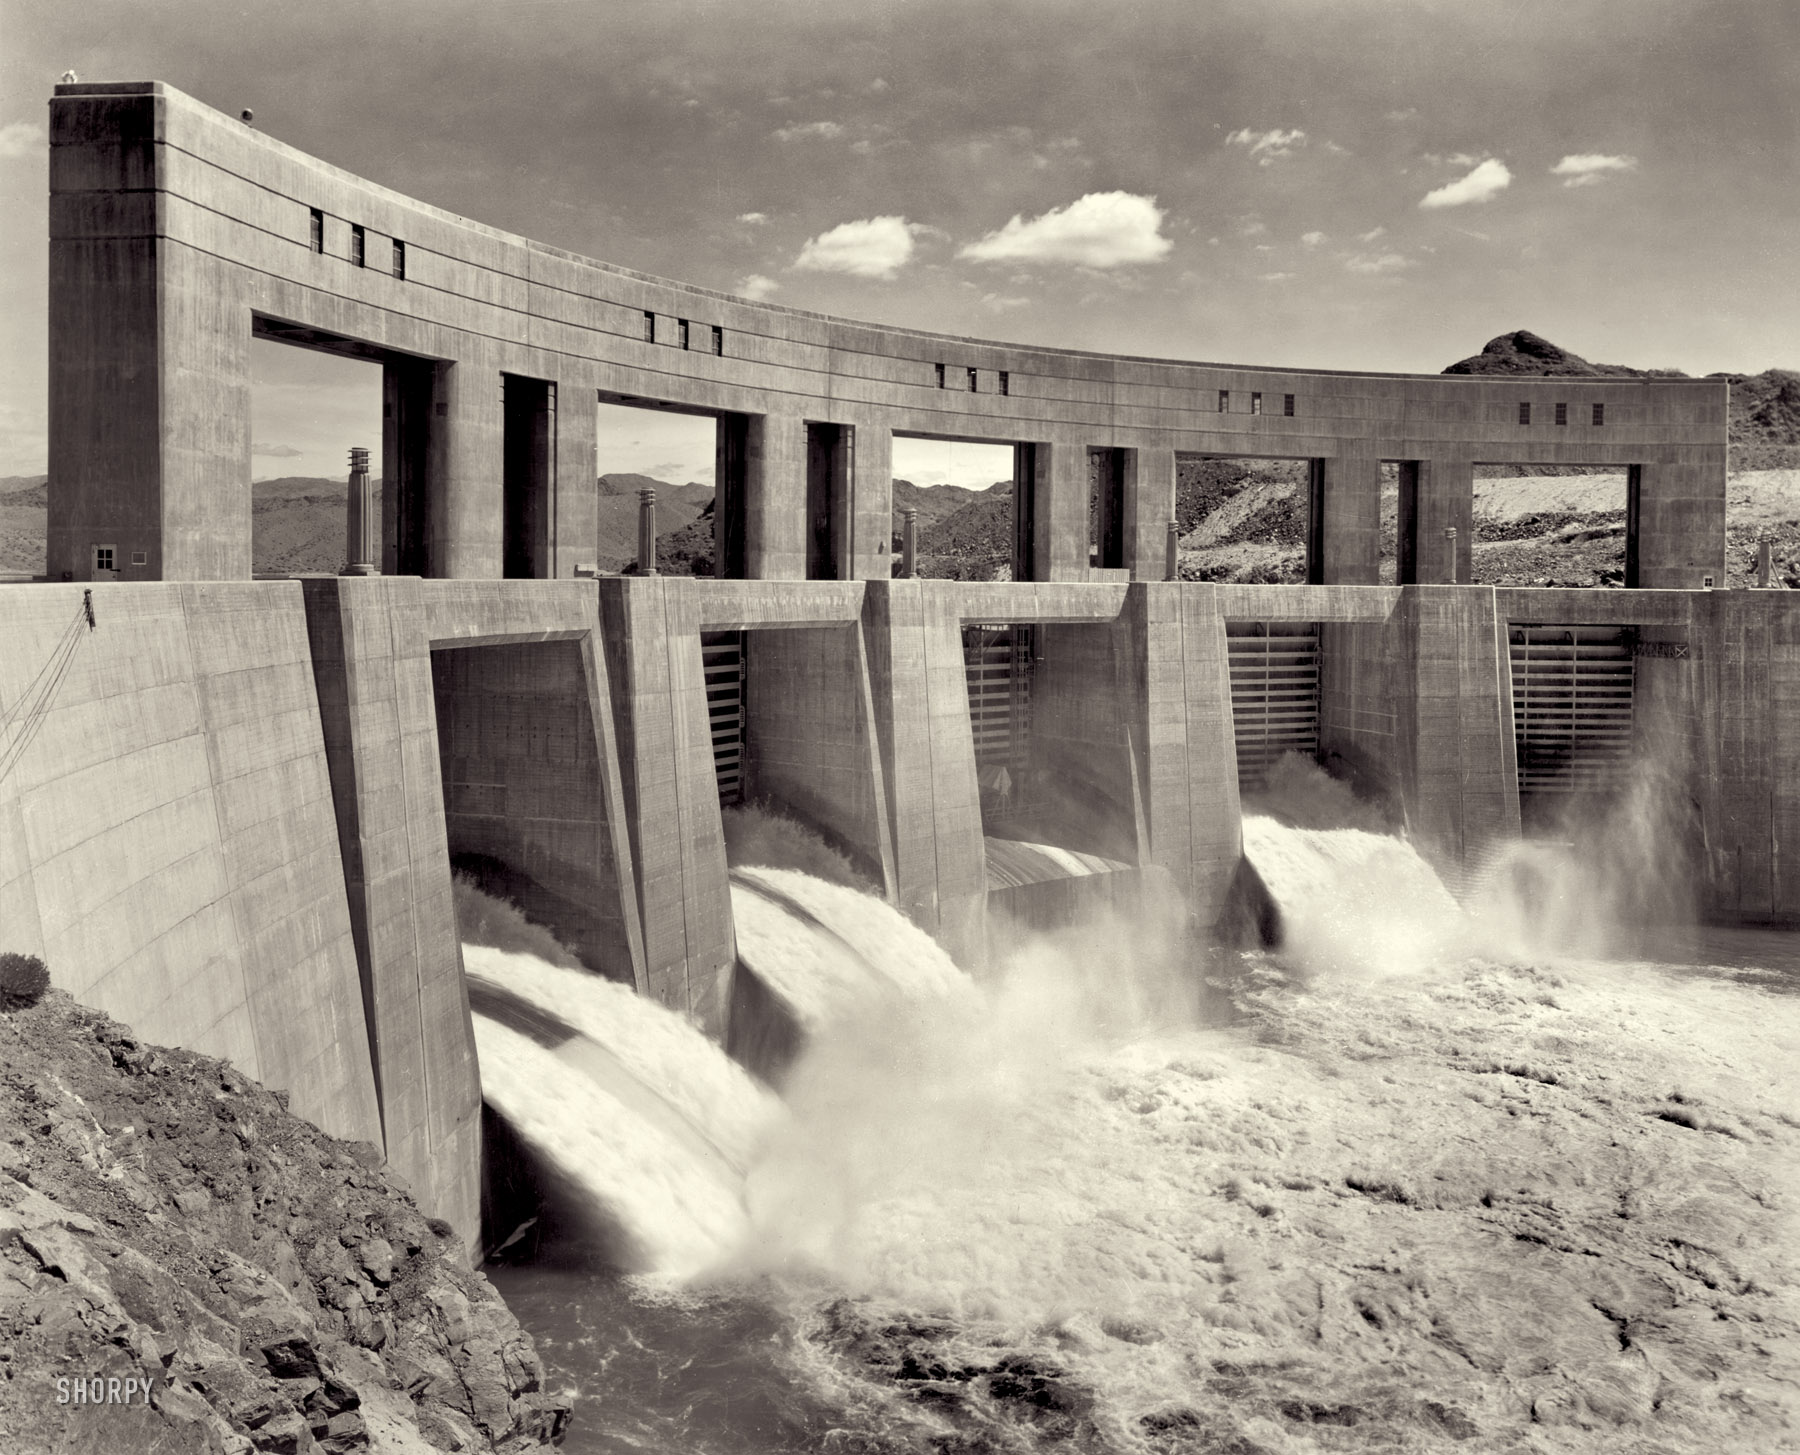 June 1941. "Parker Dam power project. View from California side into Arizona." Gelatin silver print by Ben Glaha, Bureau of Reclamation. View full size.